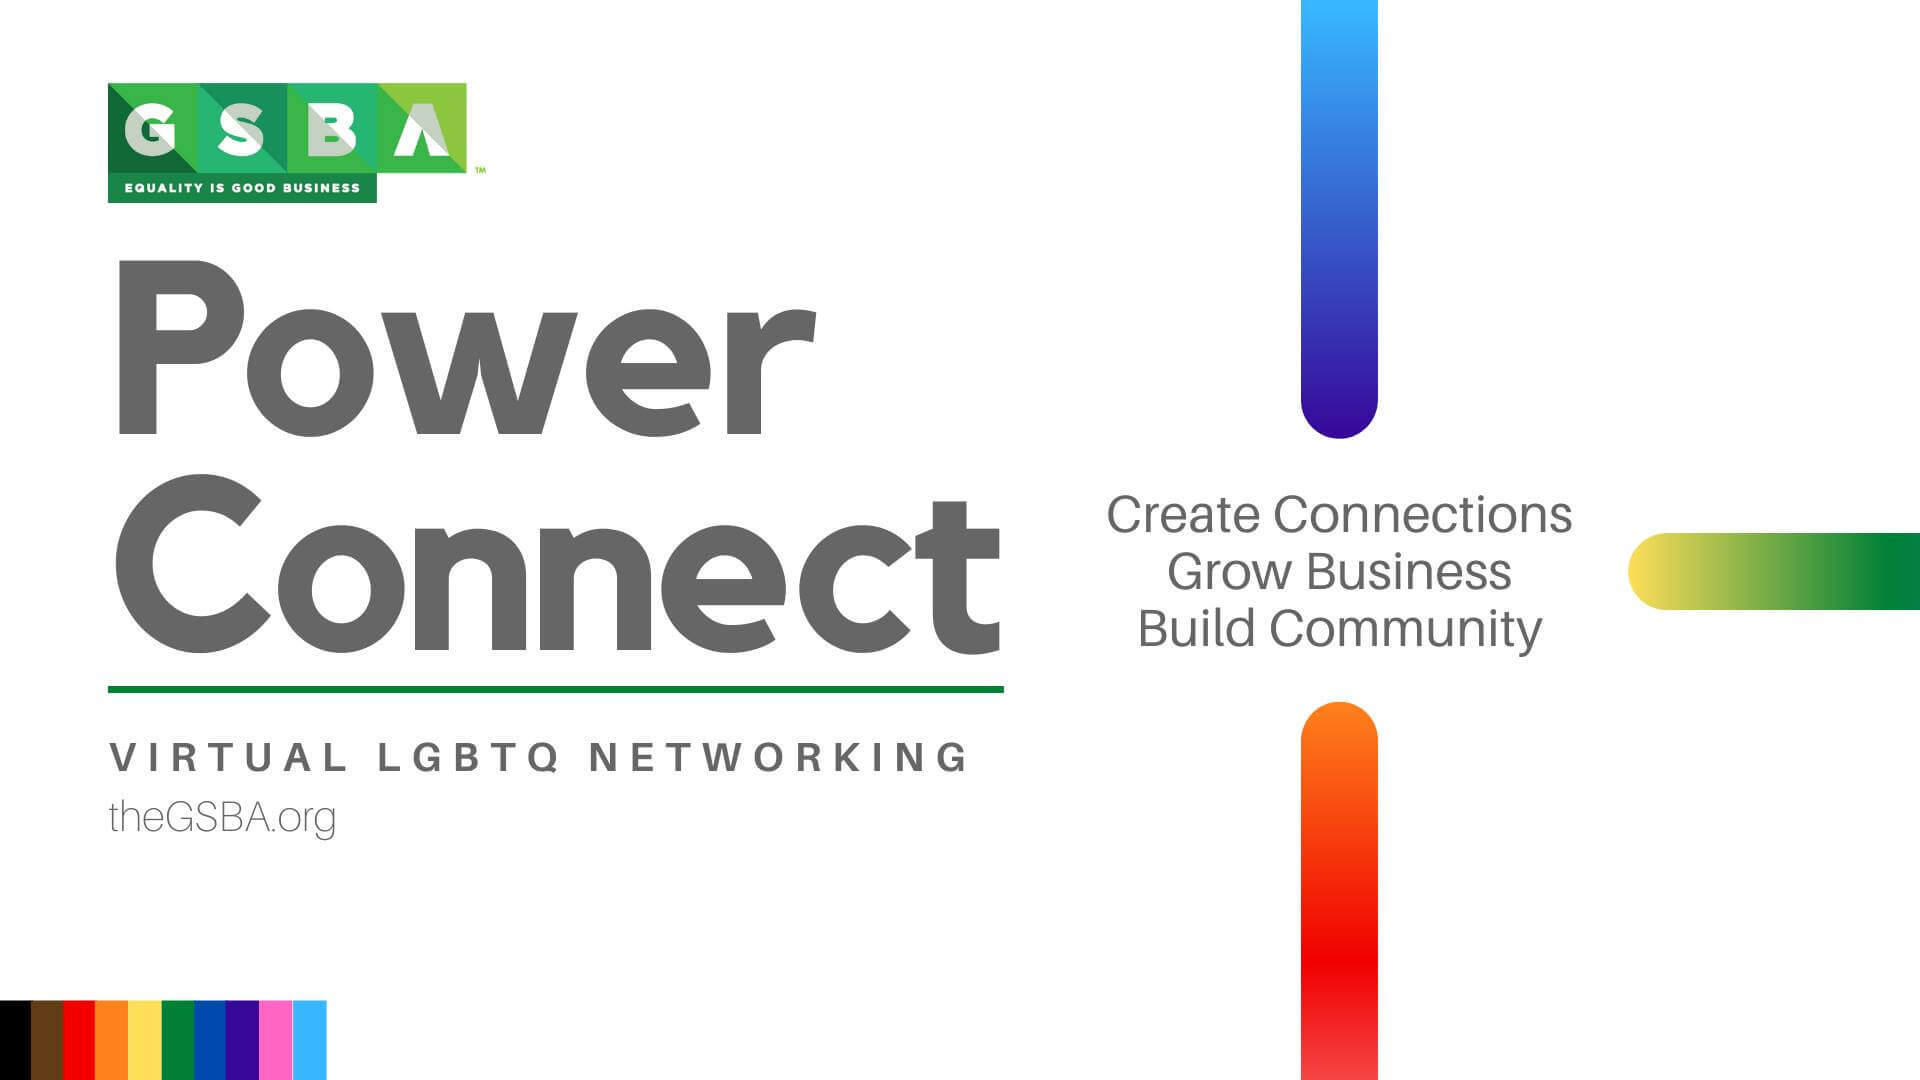 GSBA Power Connect 1